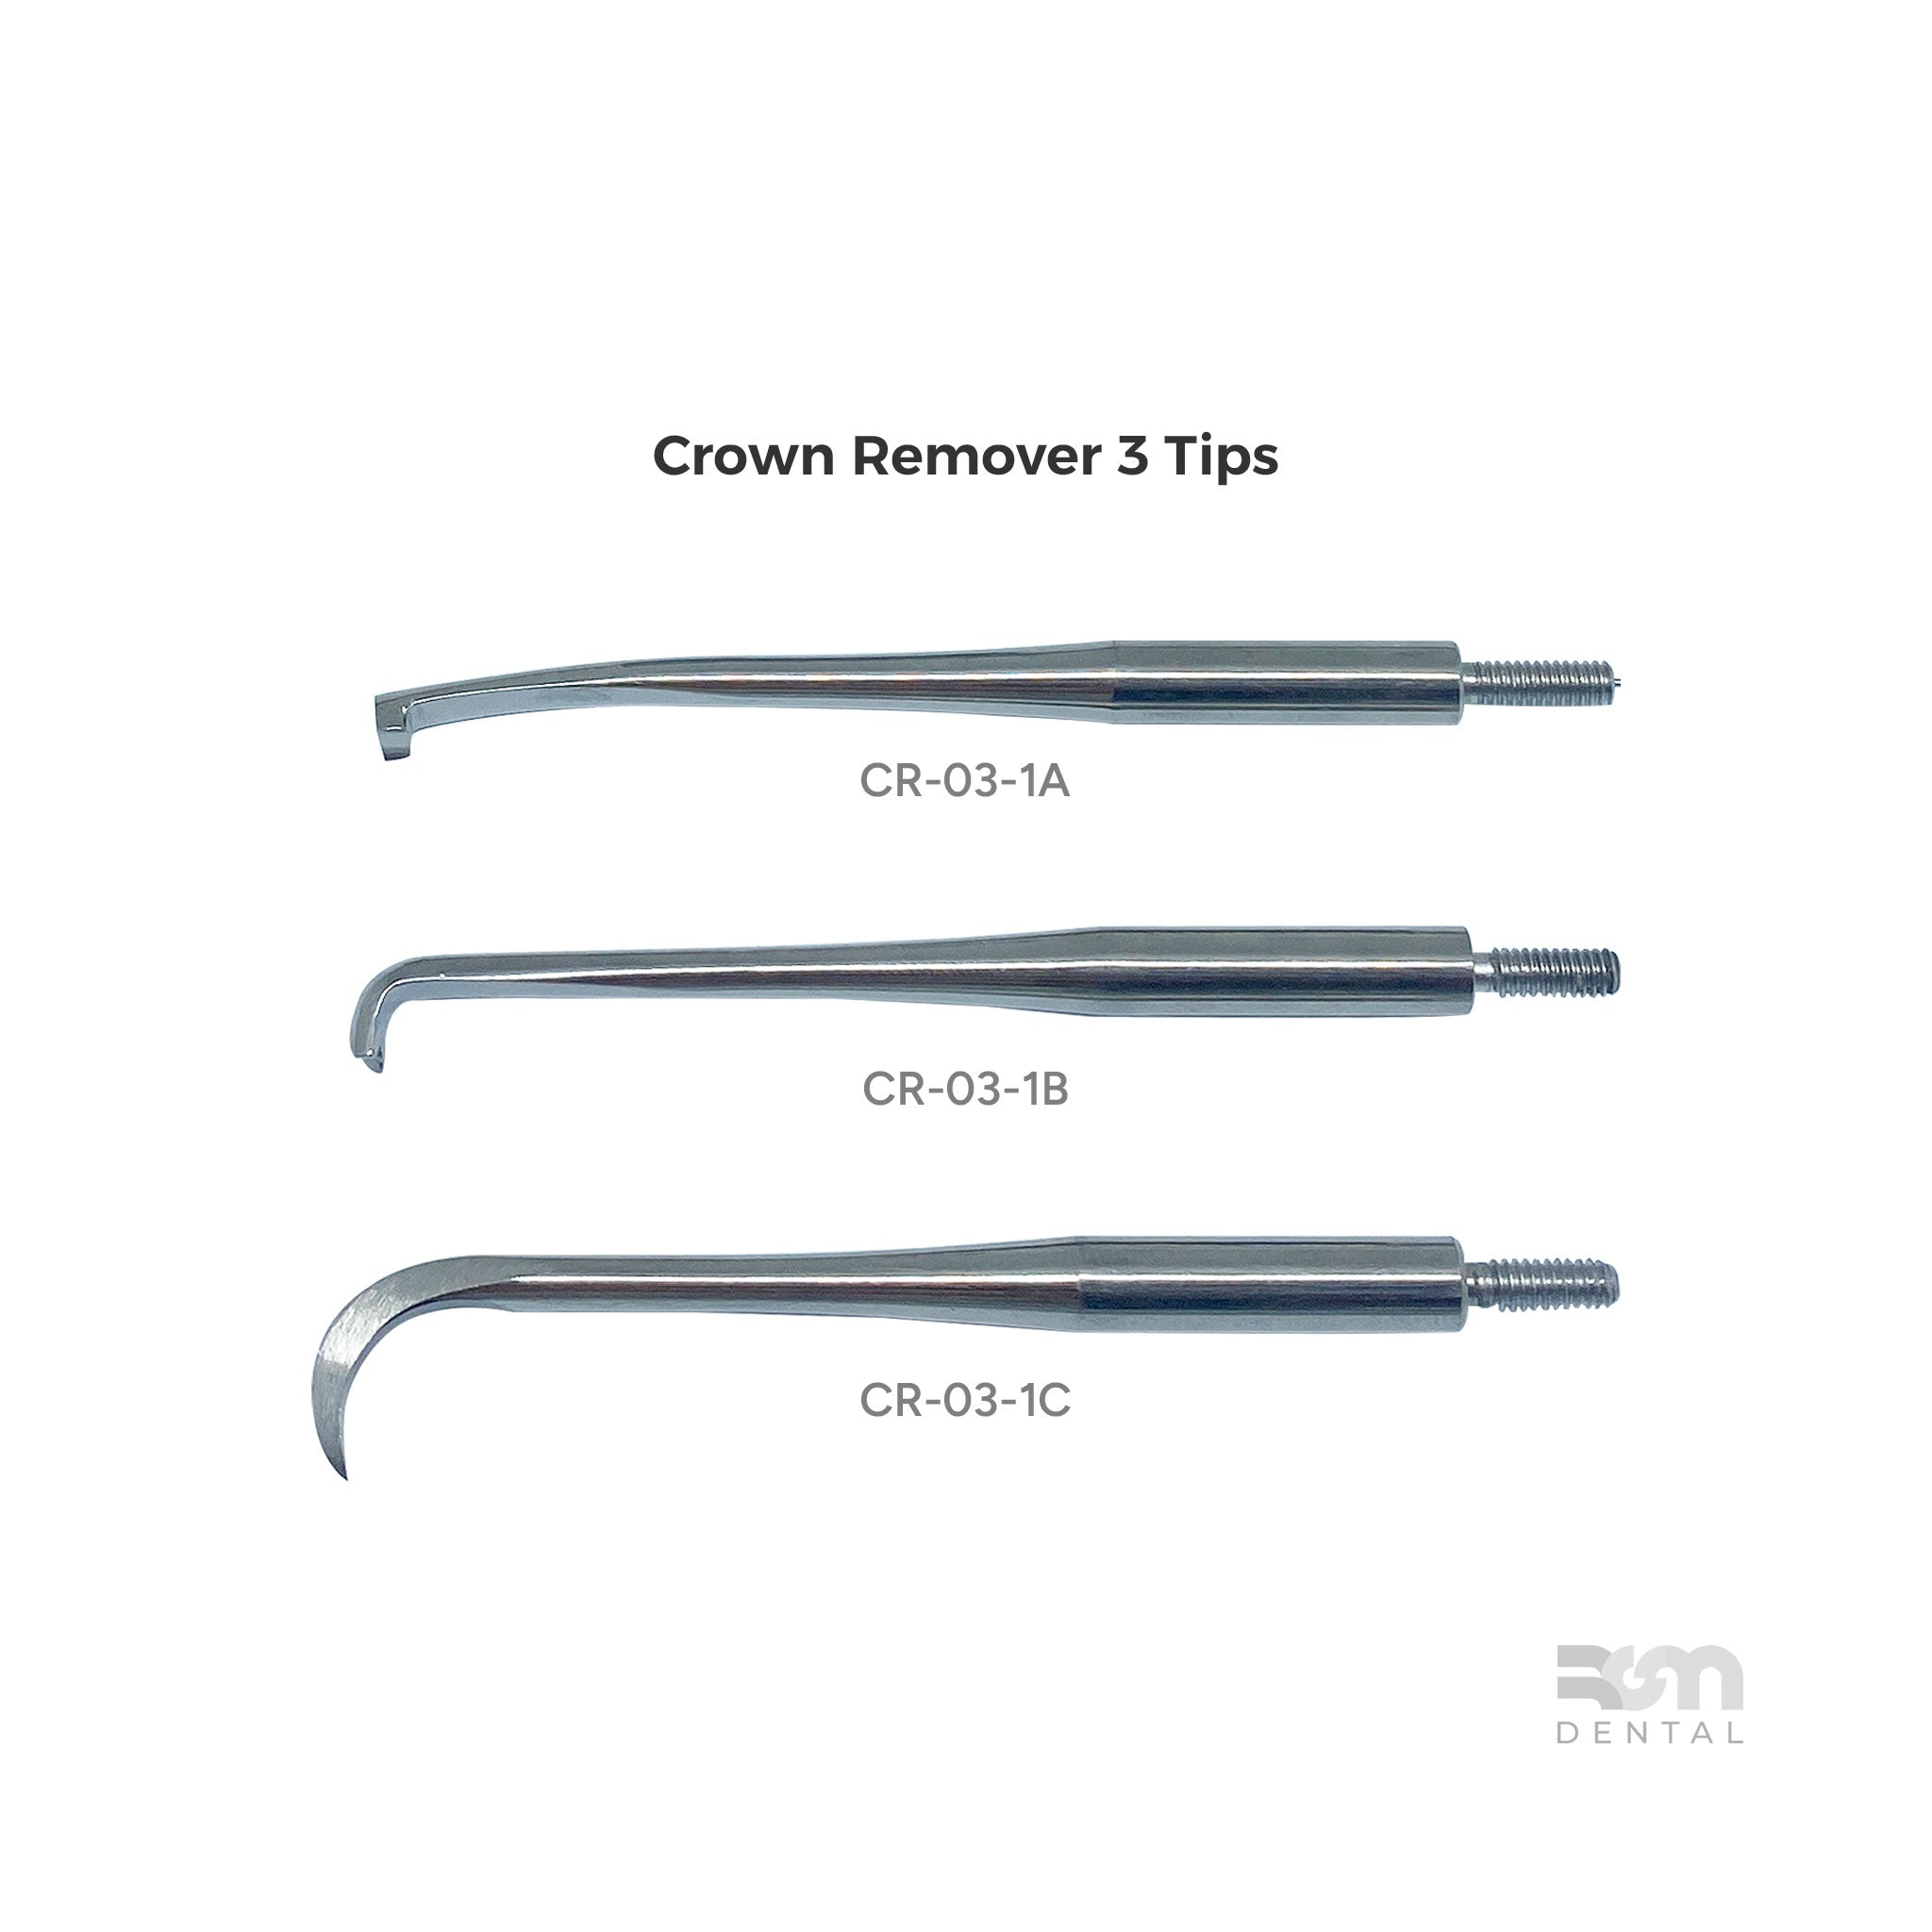 Crown Remover 3 Tips